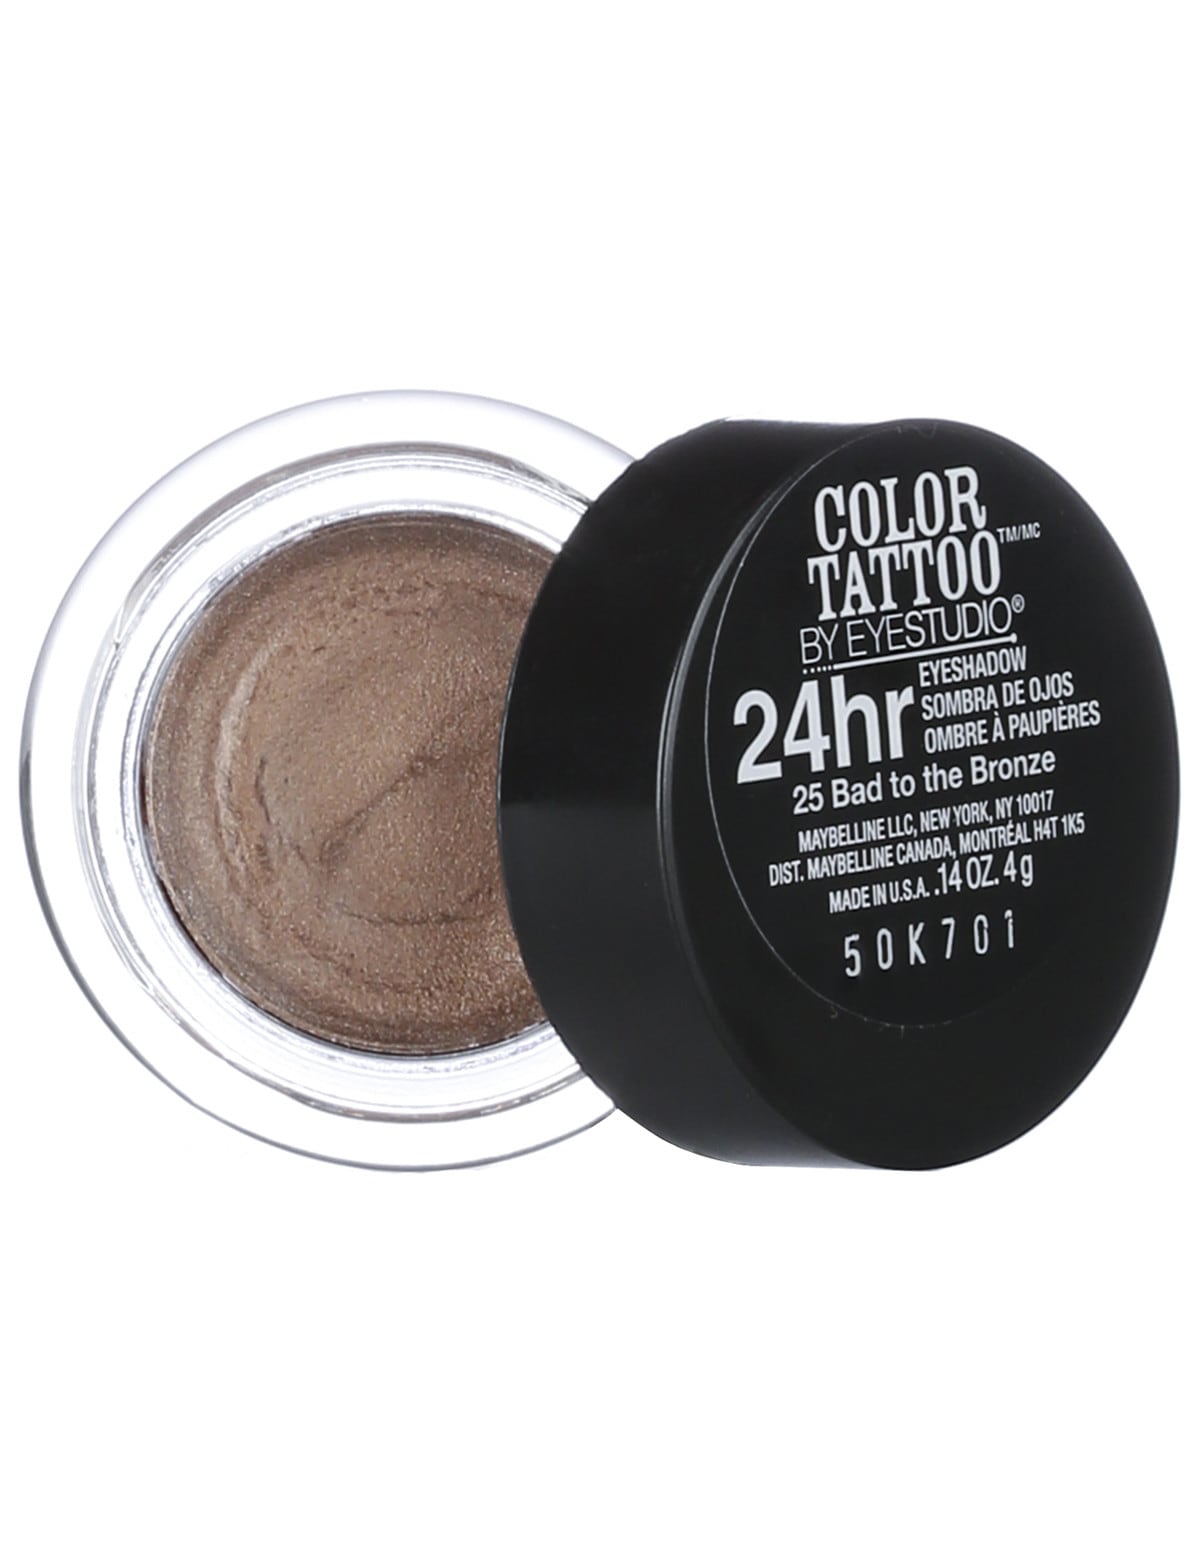 Maybelline Color Tattoo 24 Hour Eyeshadow  Eyeshadow Review  Swatches